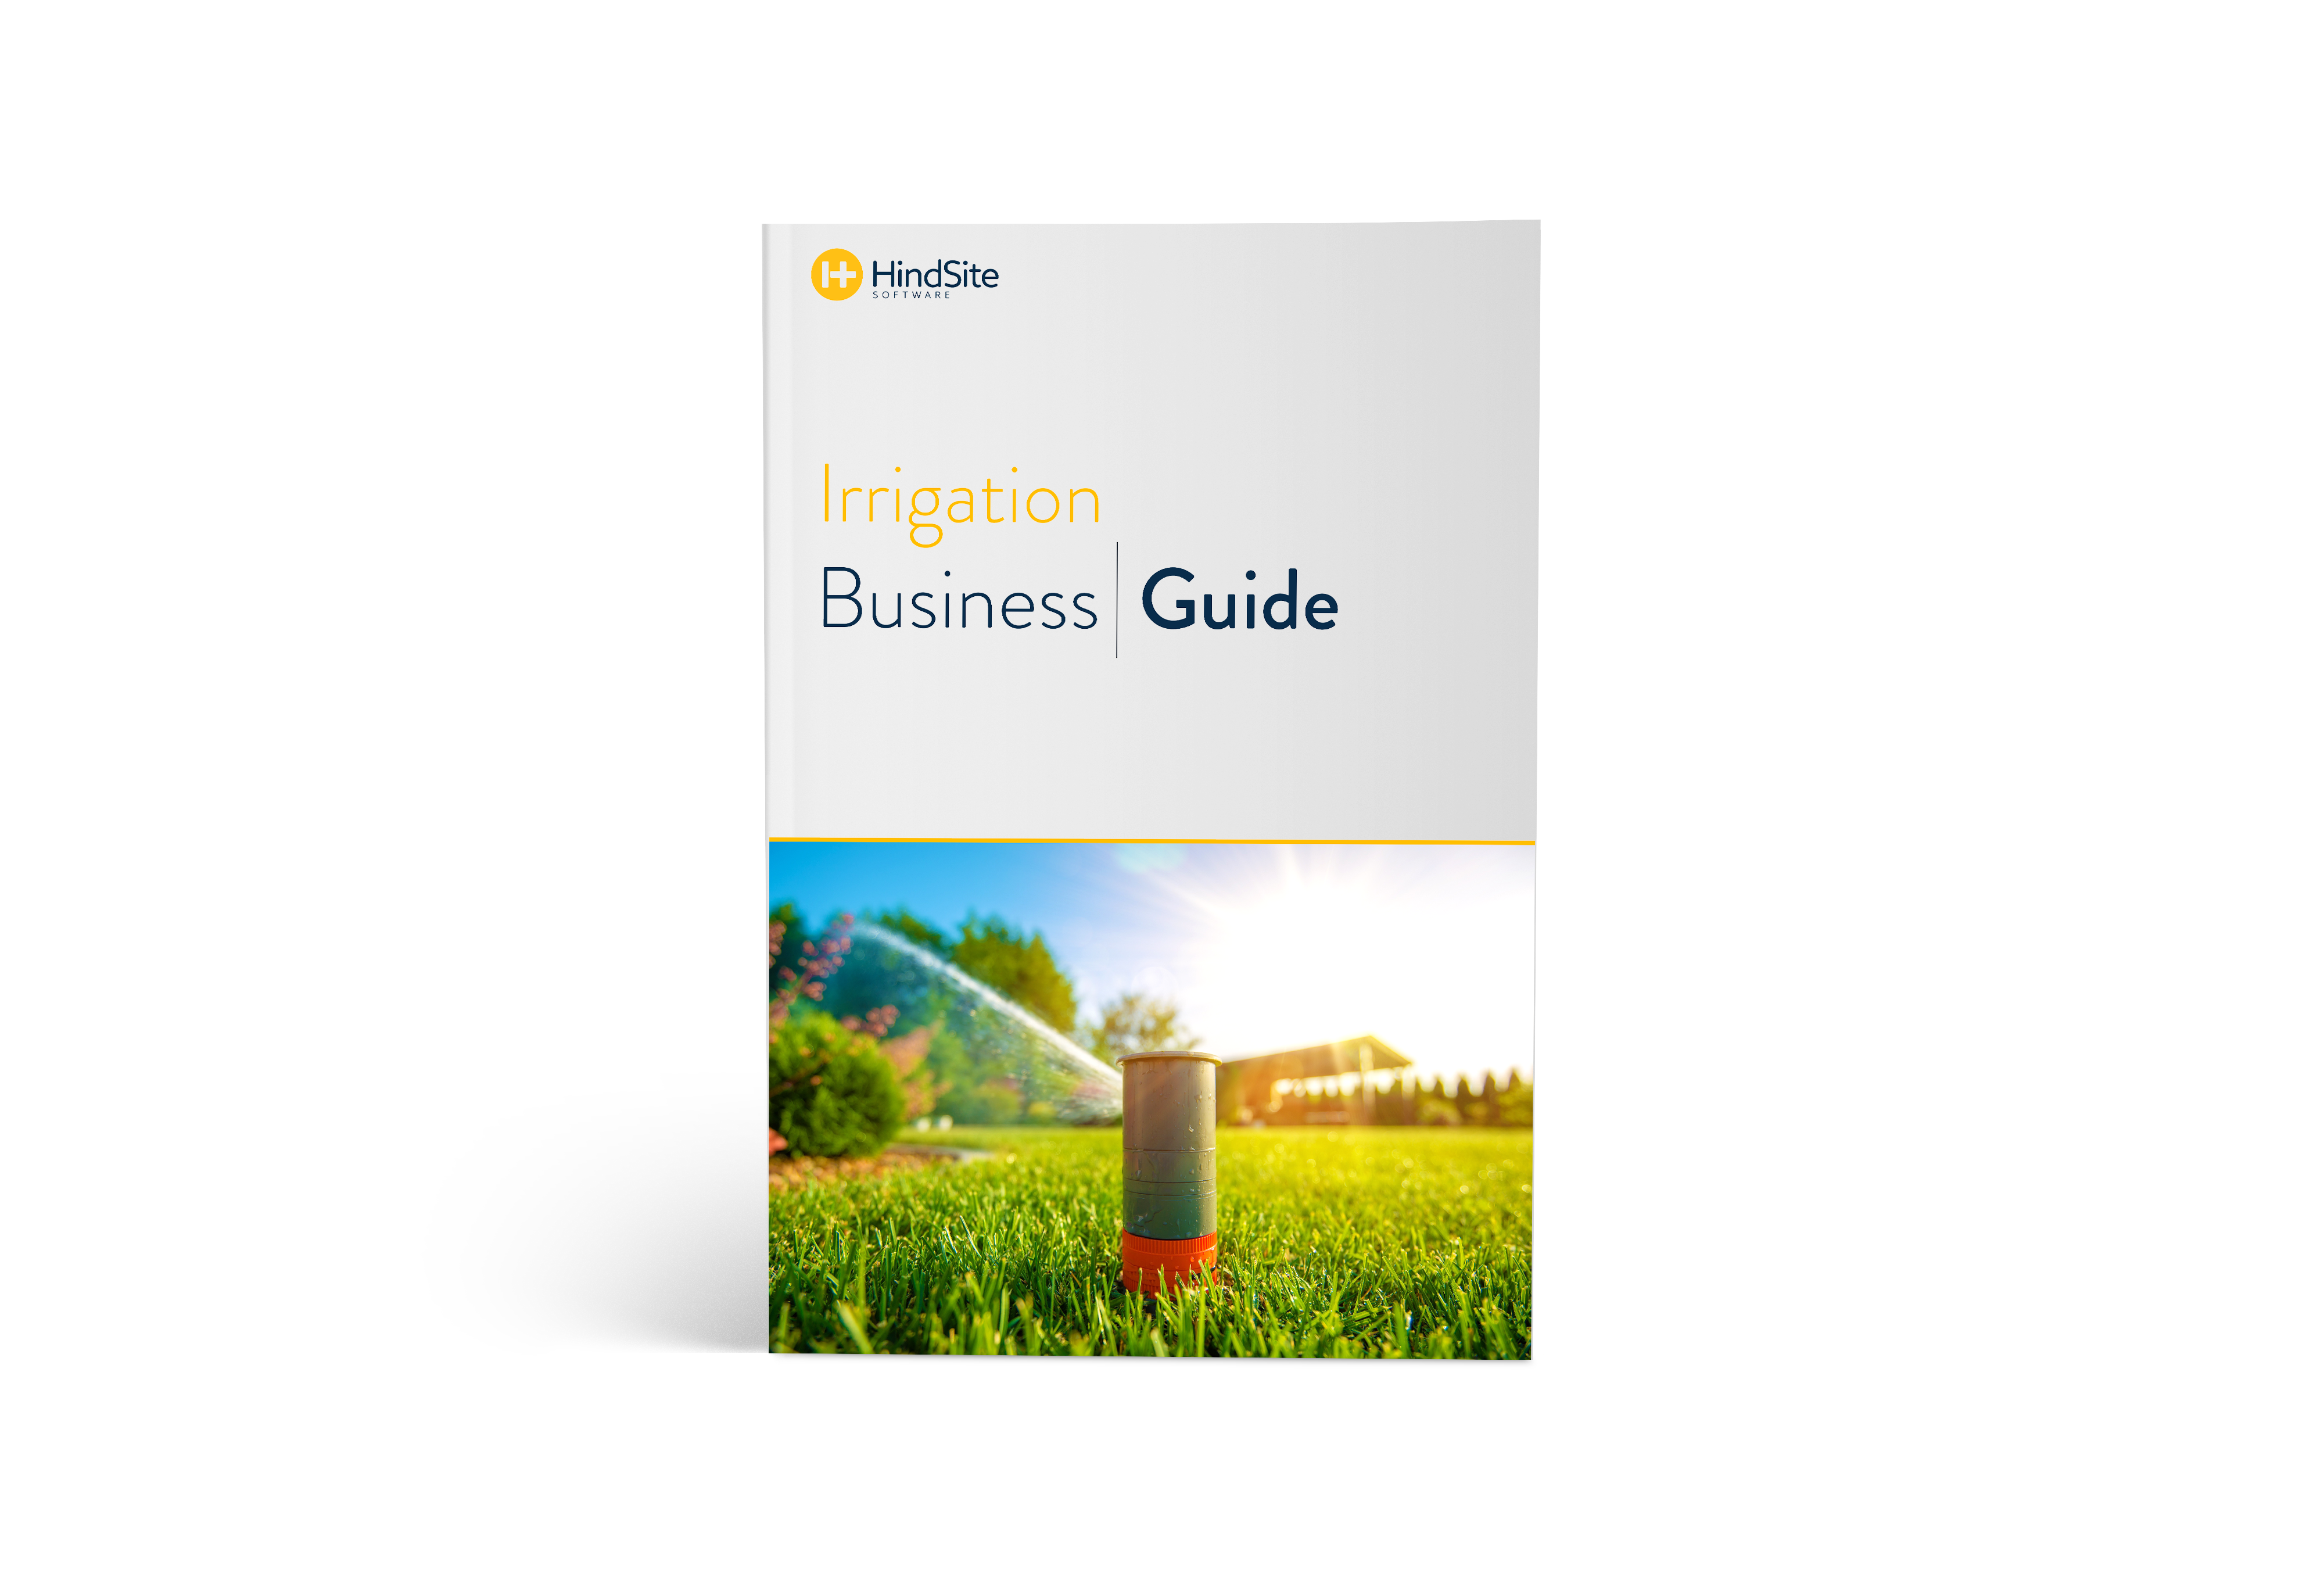 Irrigation Business Guide ebook cover.